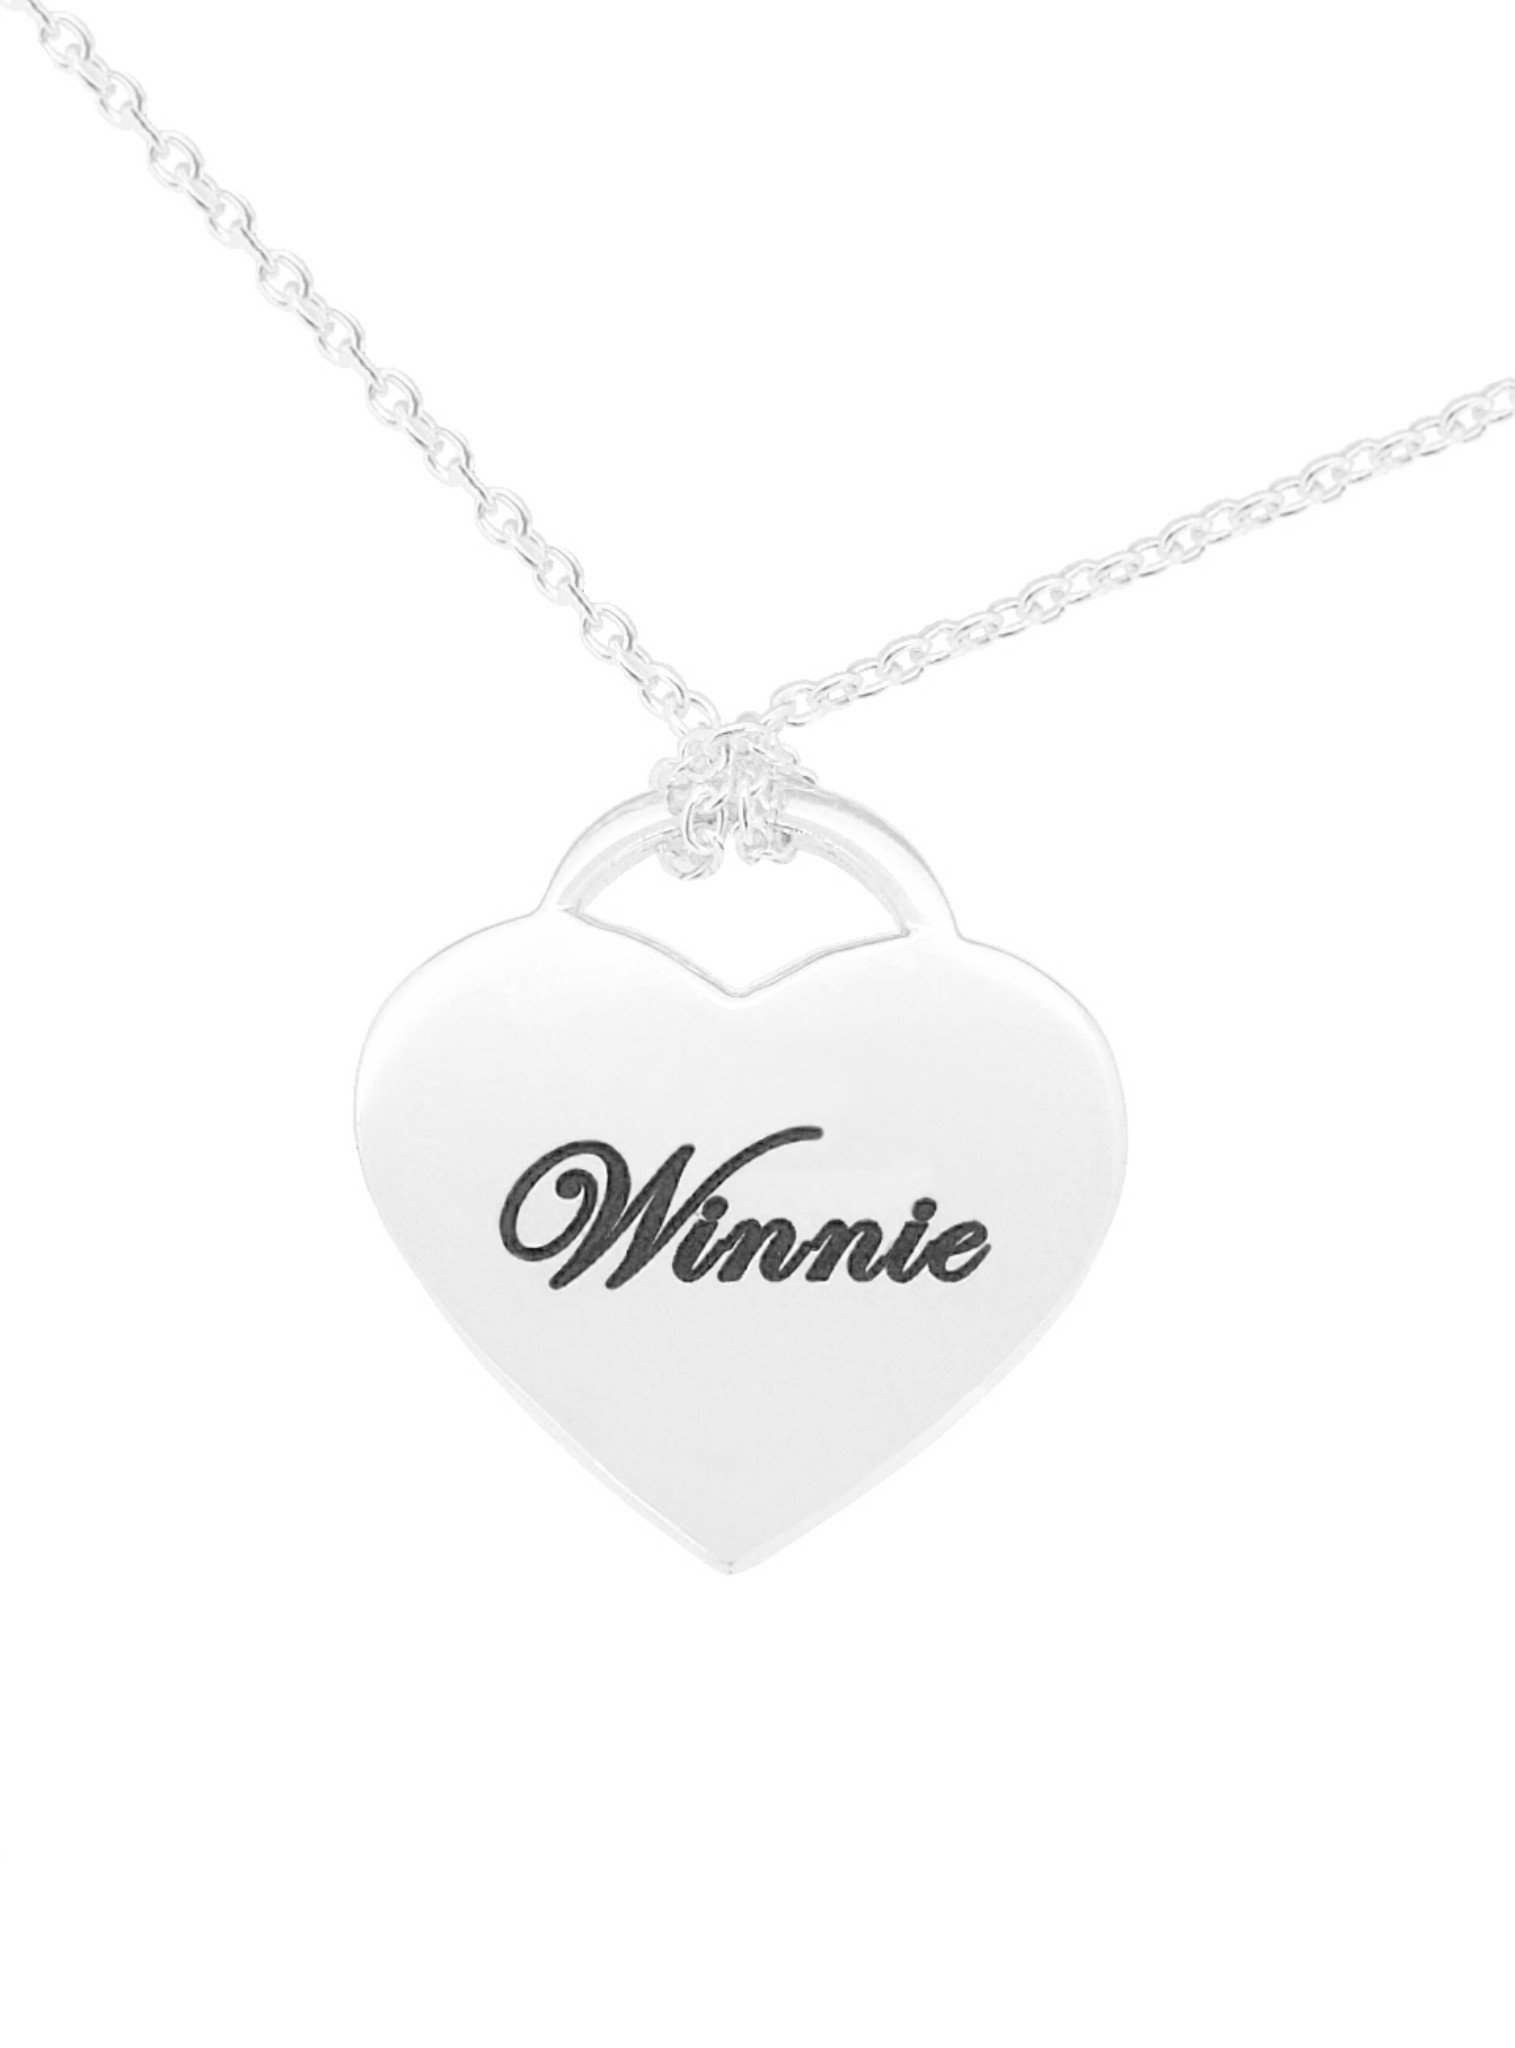 22mm Serling Silver Personalised Design Heart Name Pendant The Jewel Shop